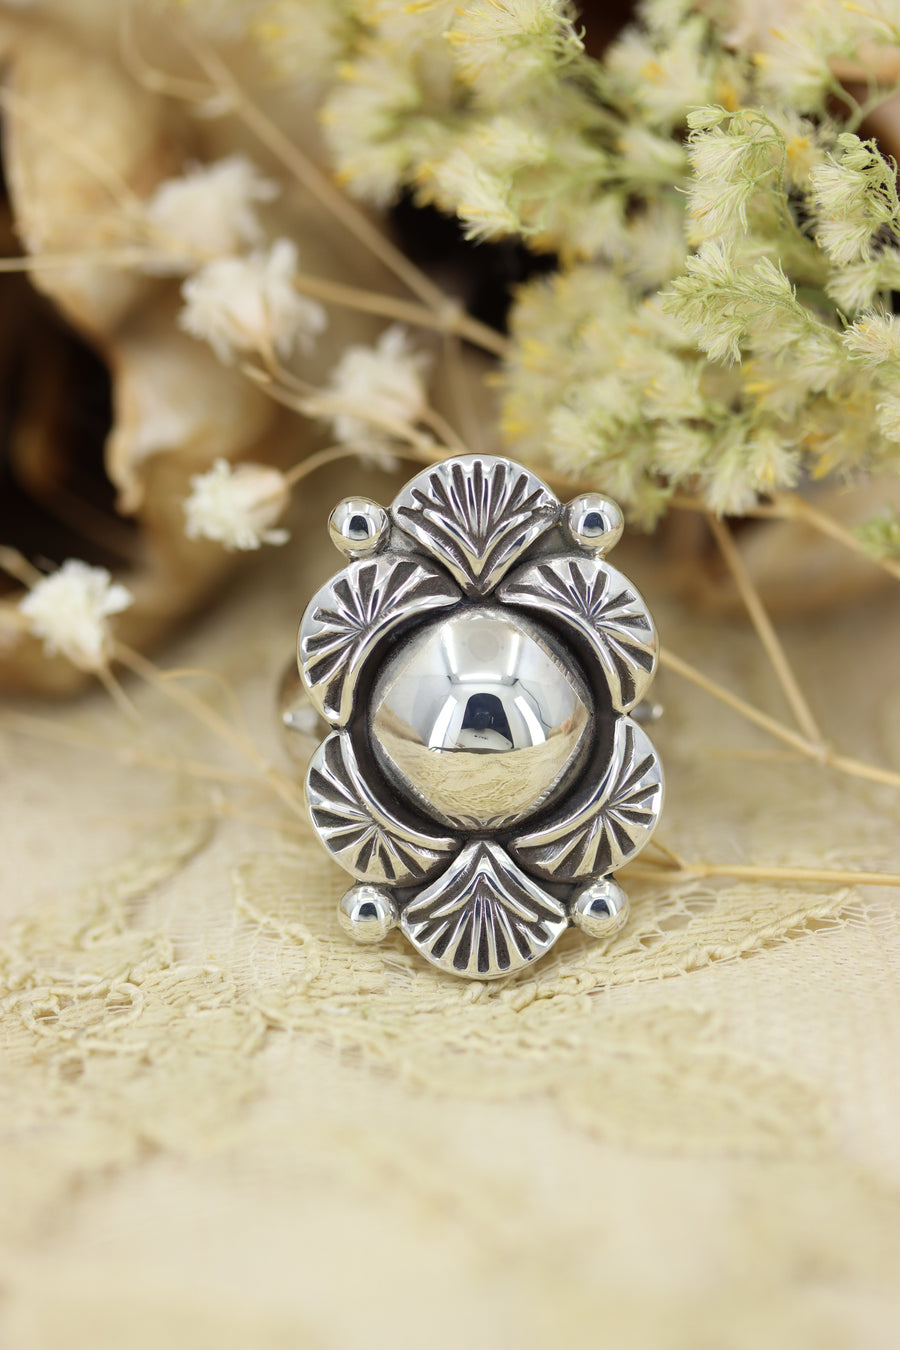 The Silver Skies Ring (size 5.5)